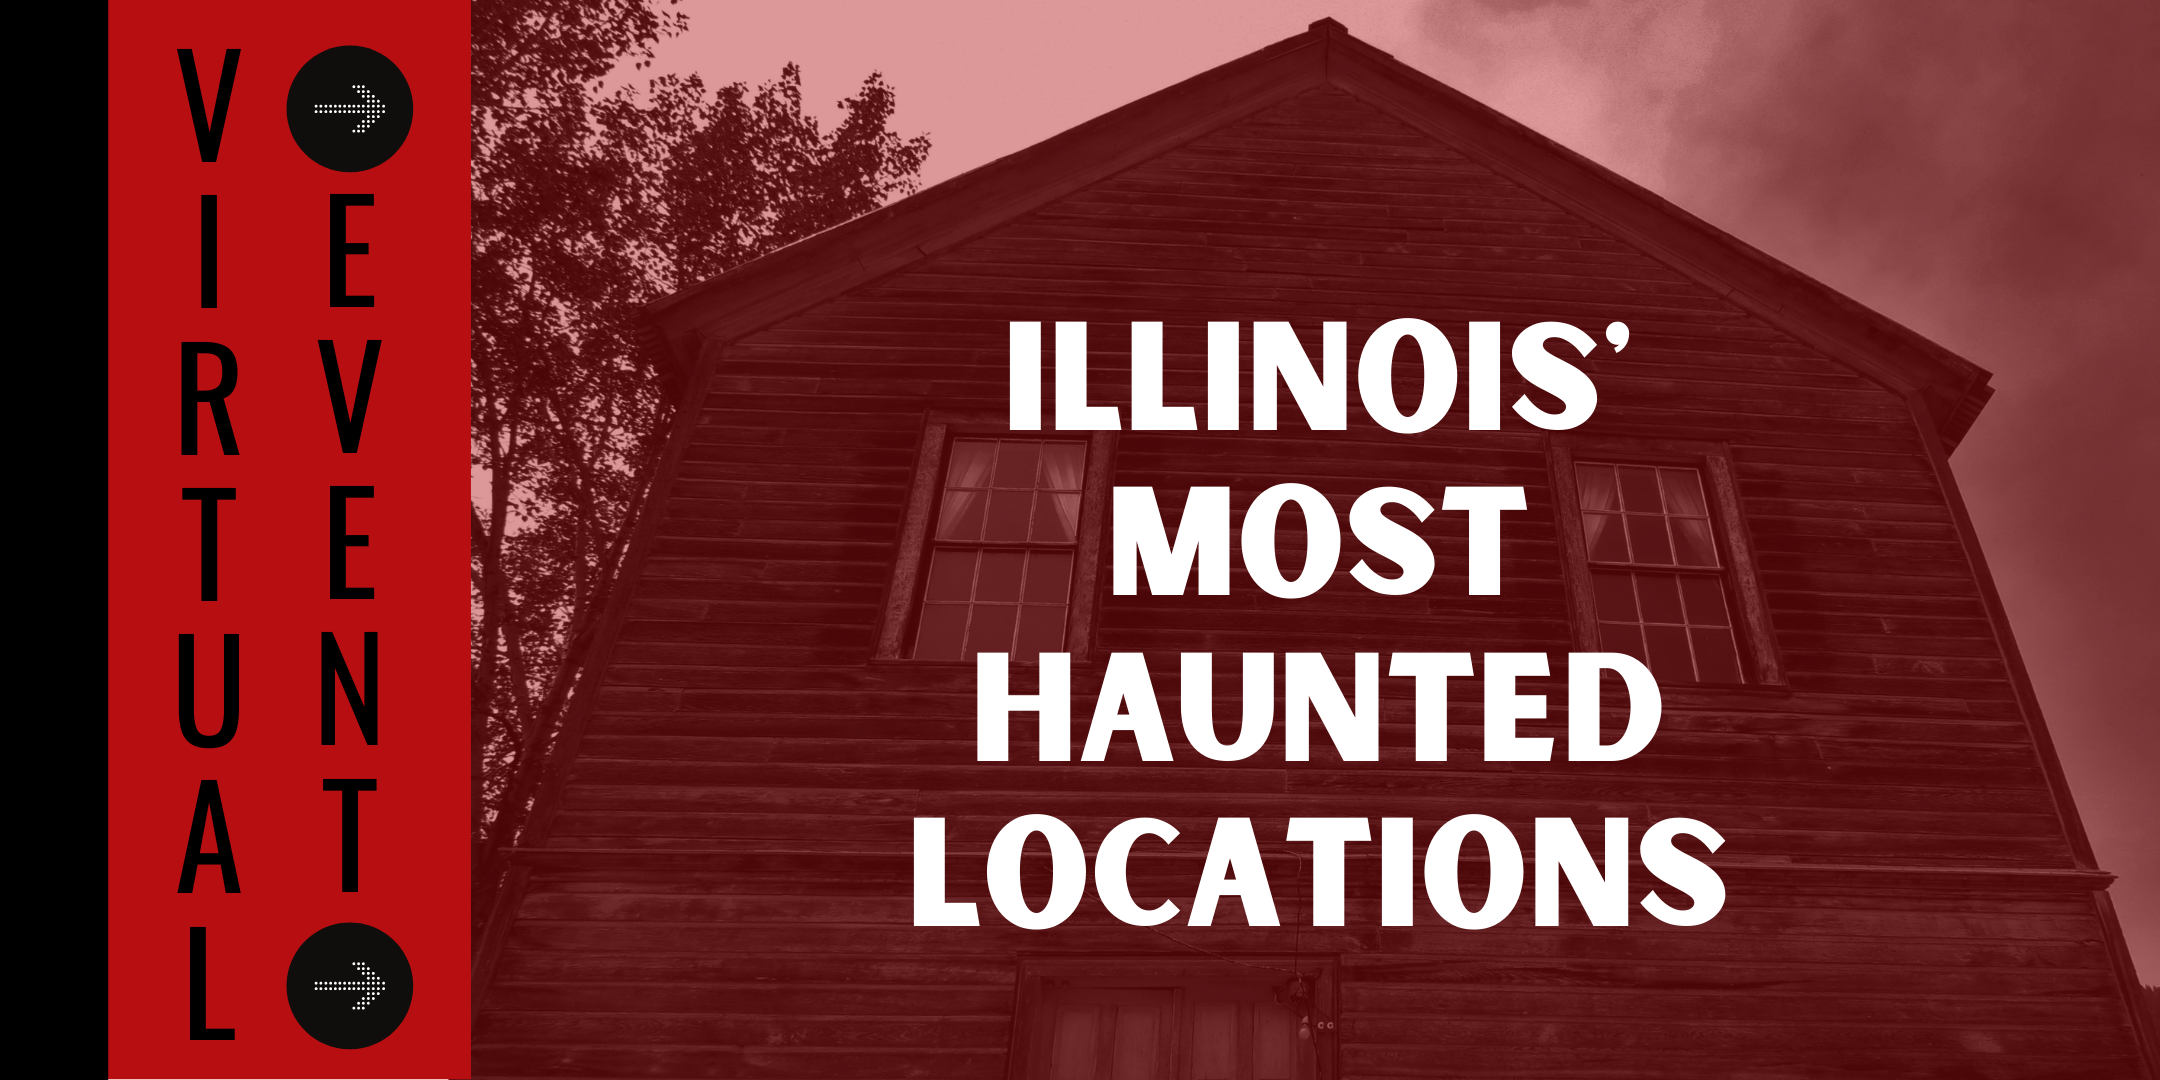 Illinois' Most Haunted Locations (Virtual) Lake Forest Library